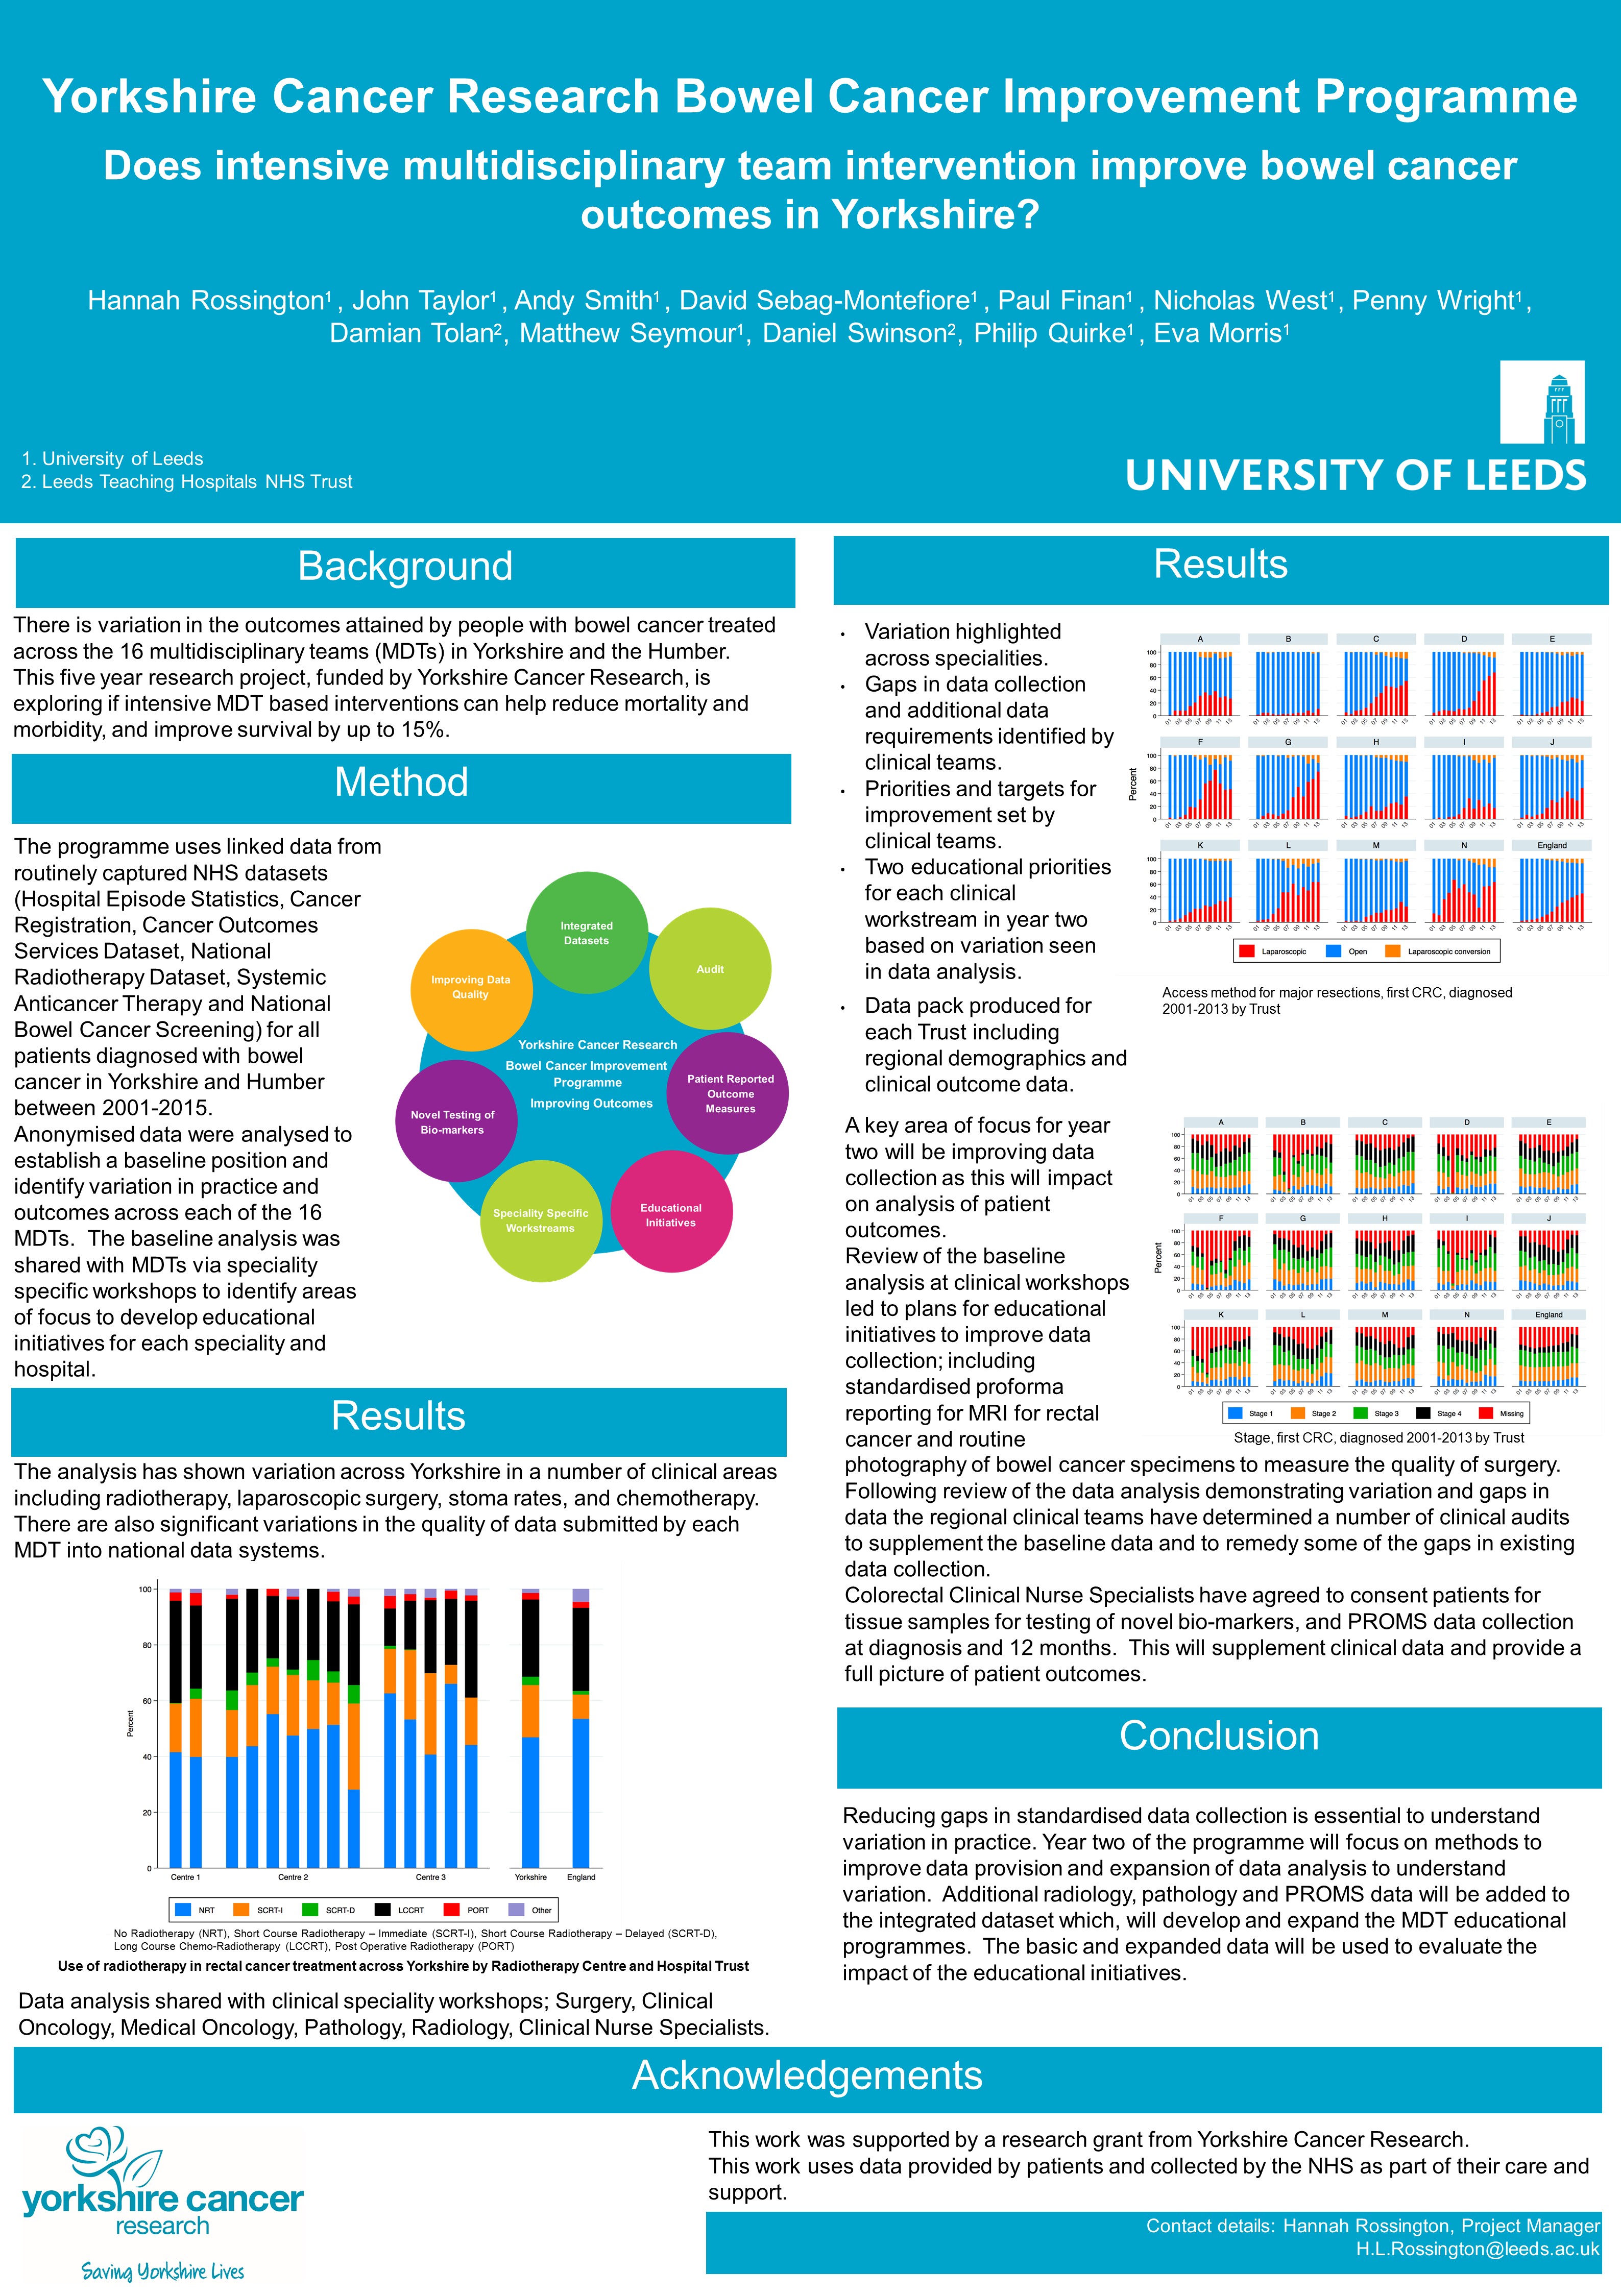 conference and poster presentation